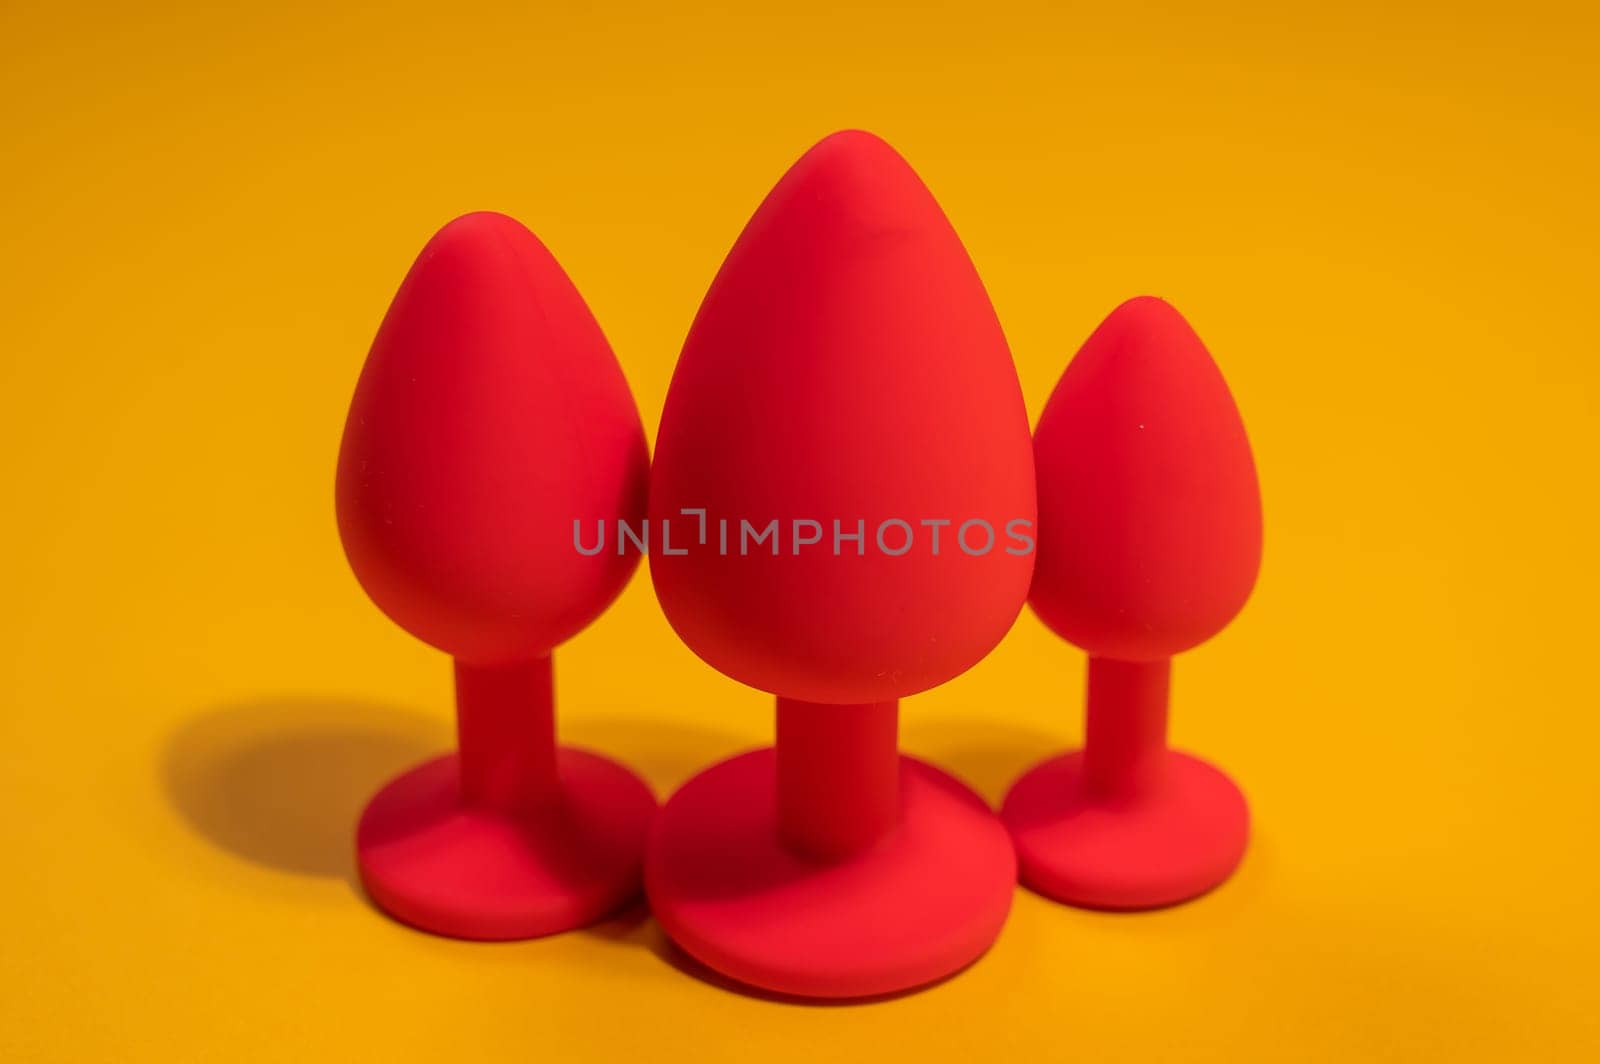 Three size silicone red butt plugs on an orange background. by mrwed54